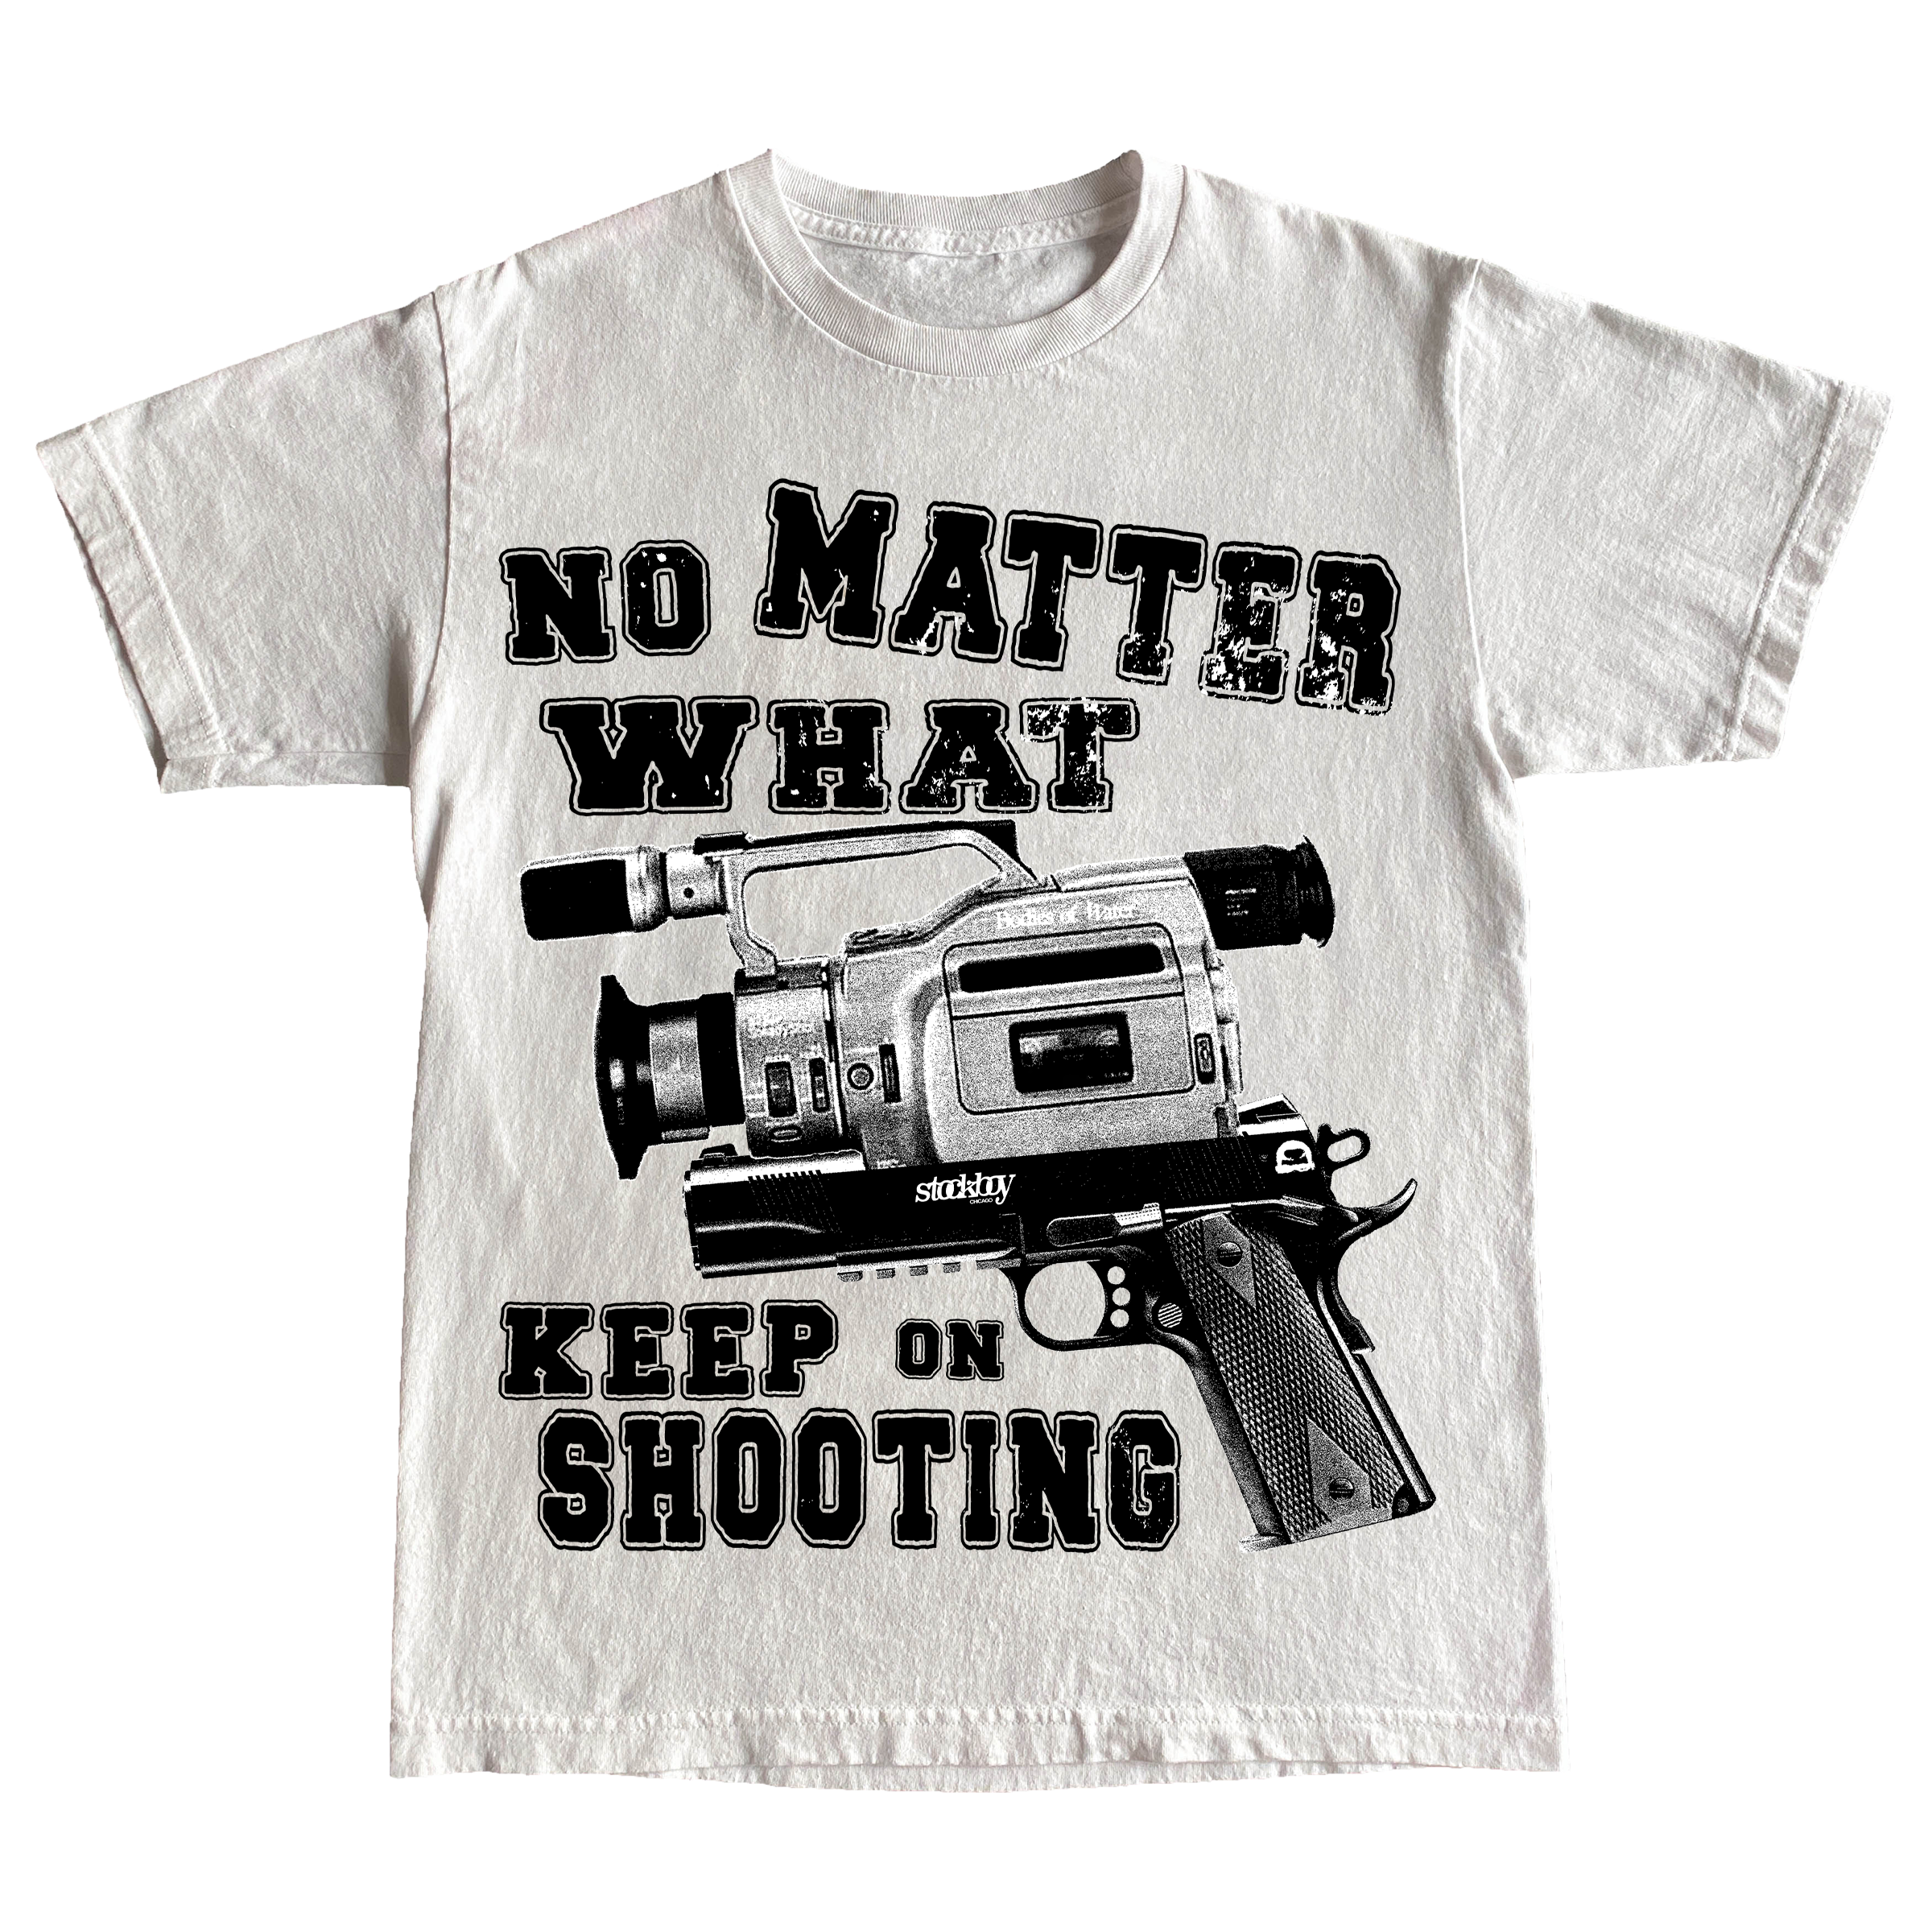 Dont Stop Shooting Tee 15 USD